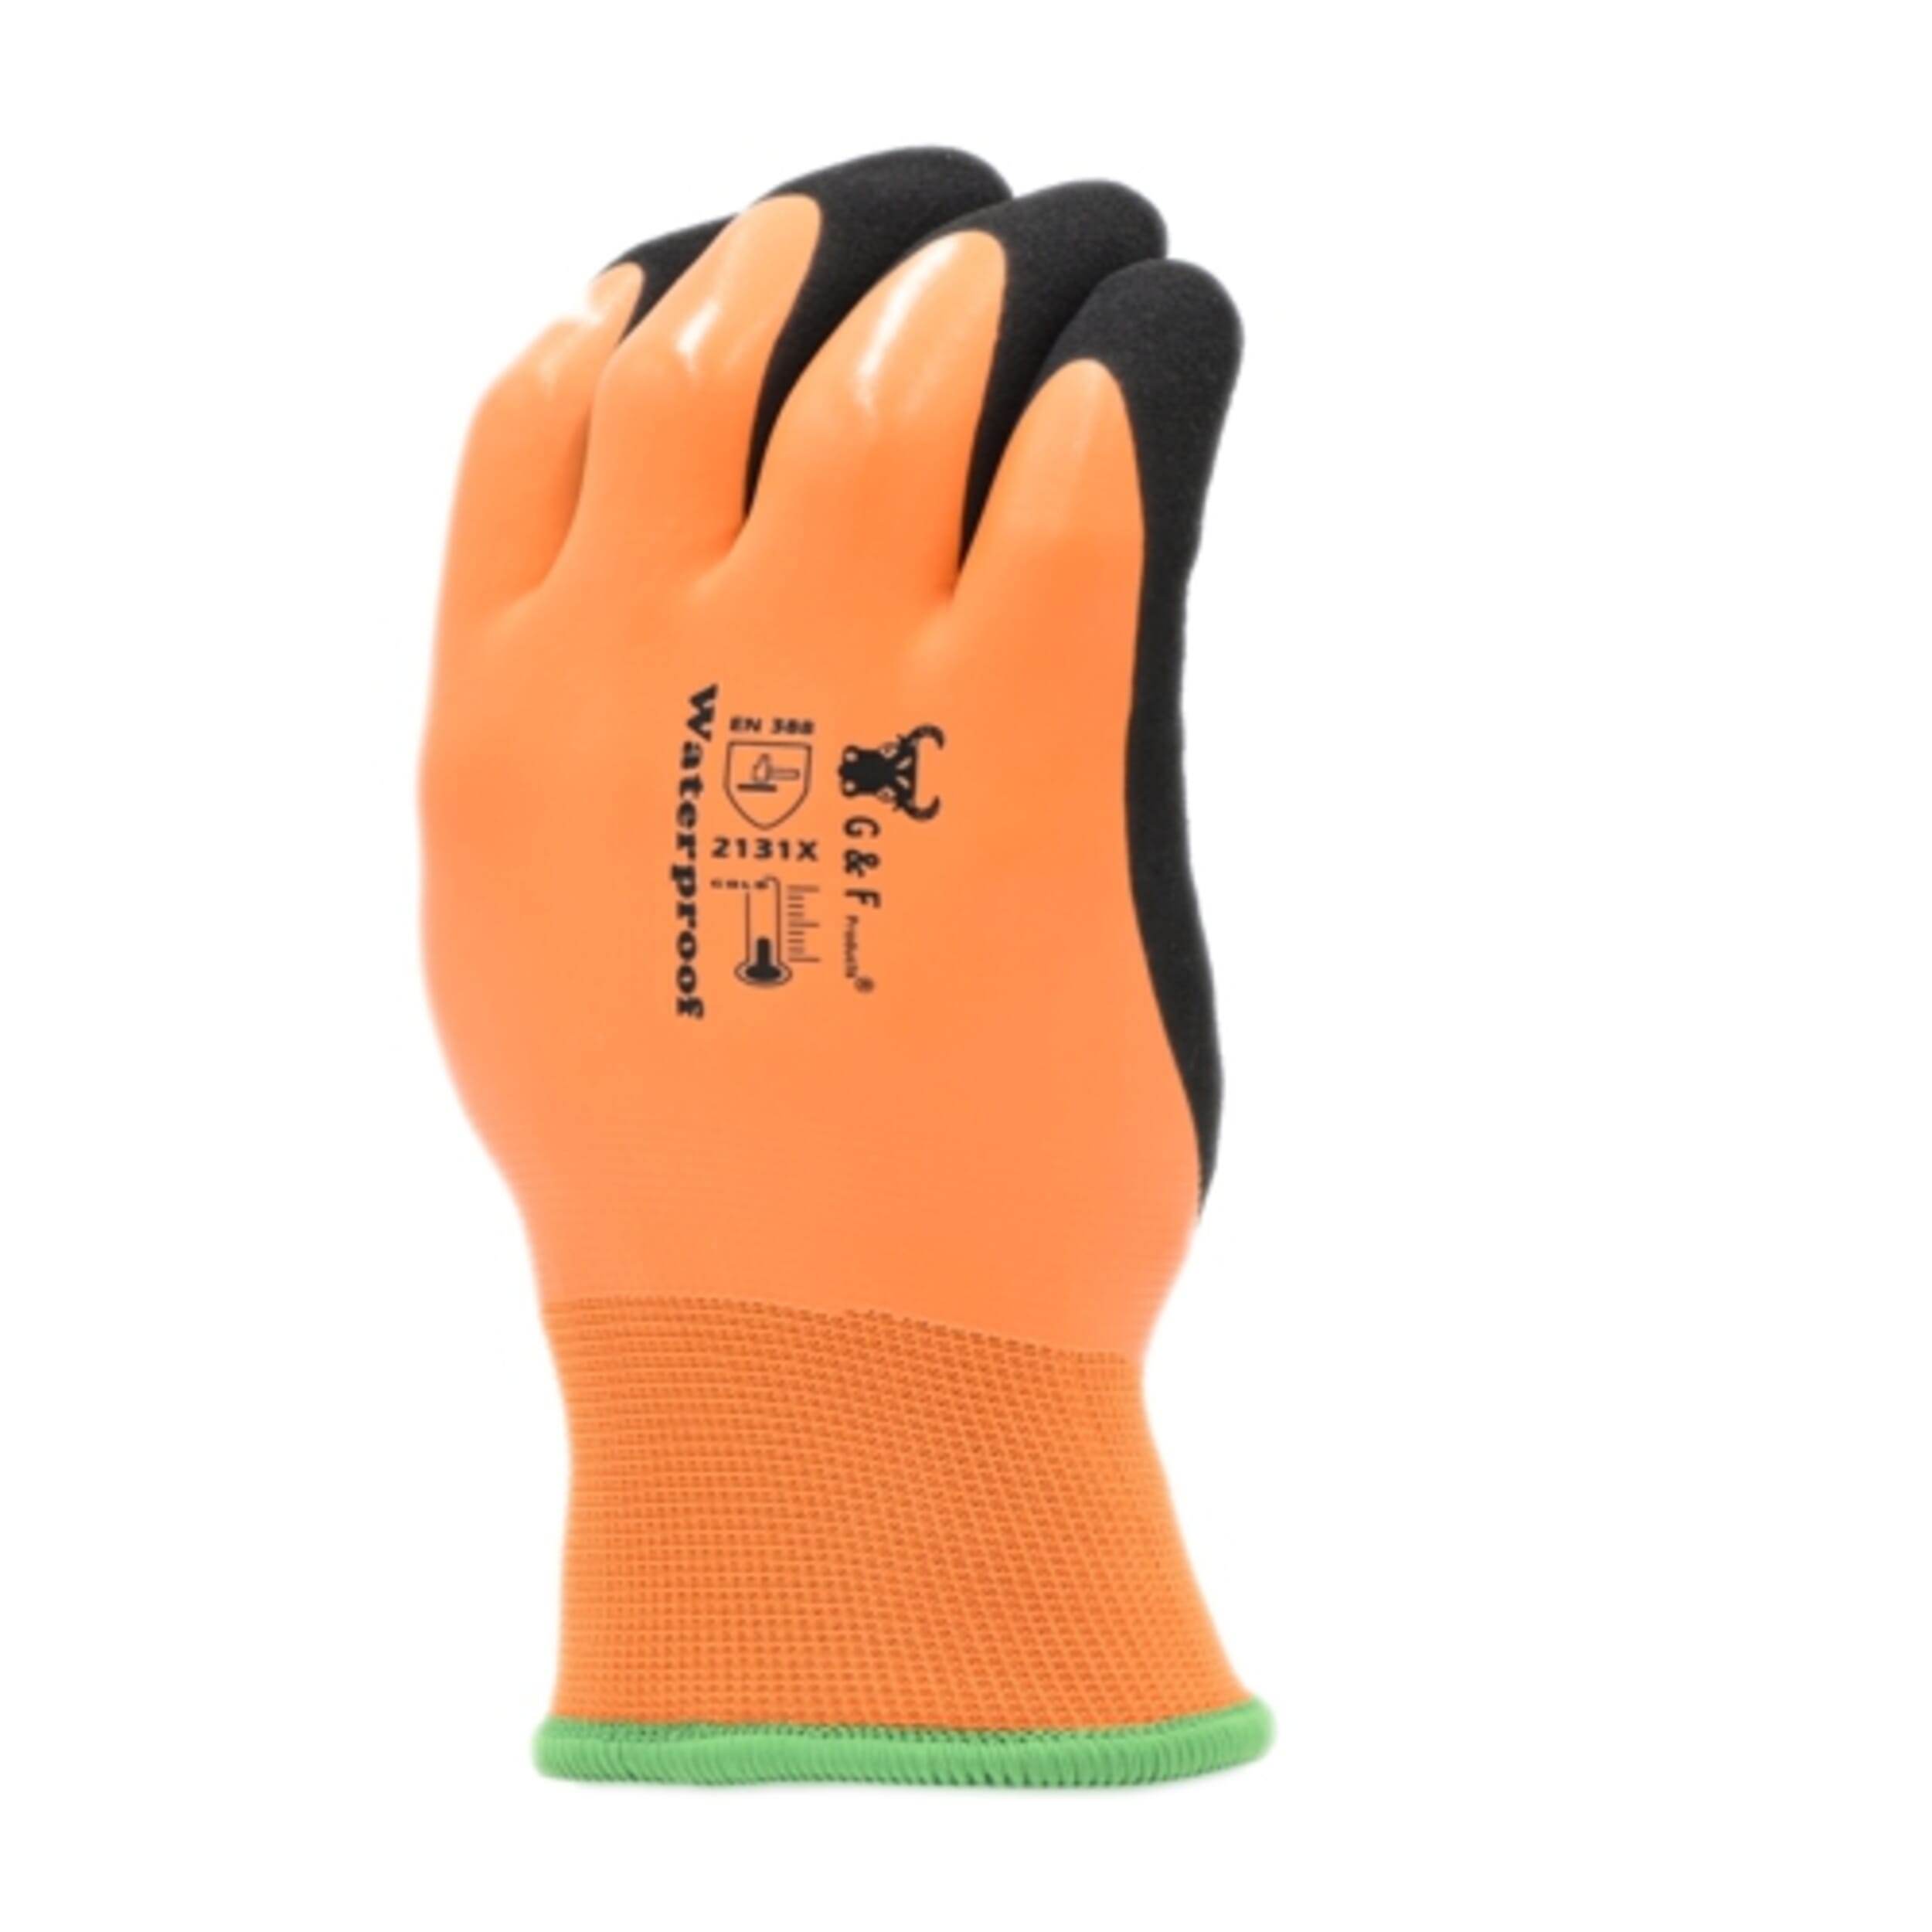 G & F Products Latex Coated Cut Resistant Work Gloves